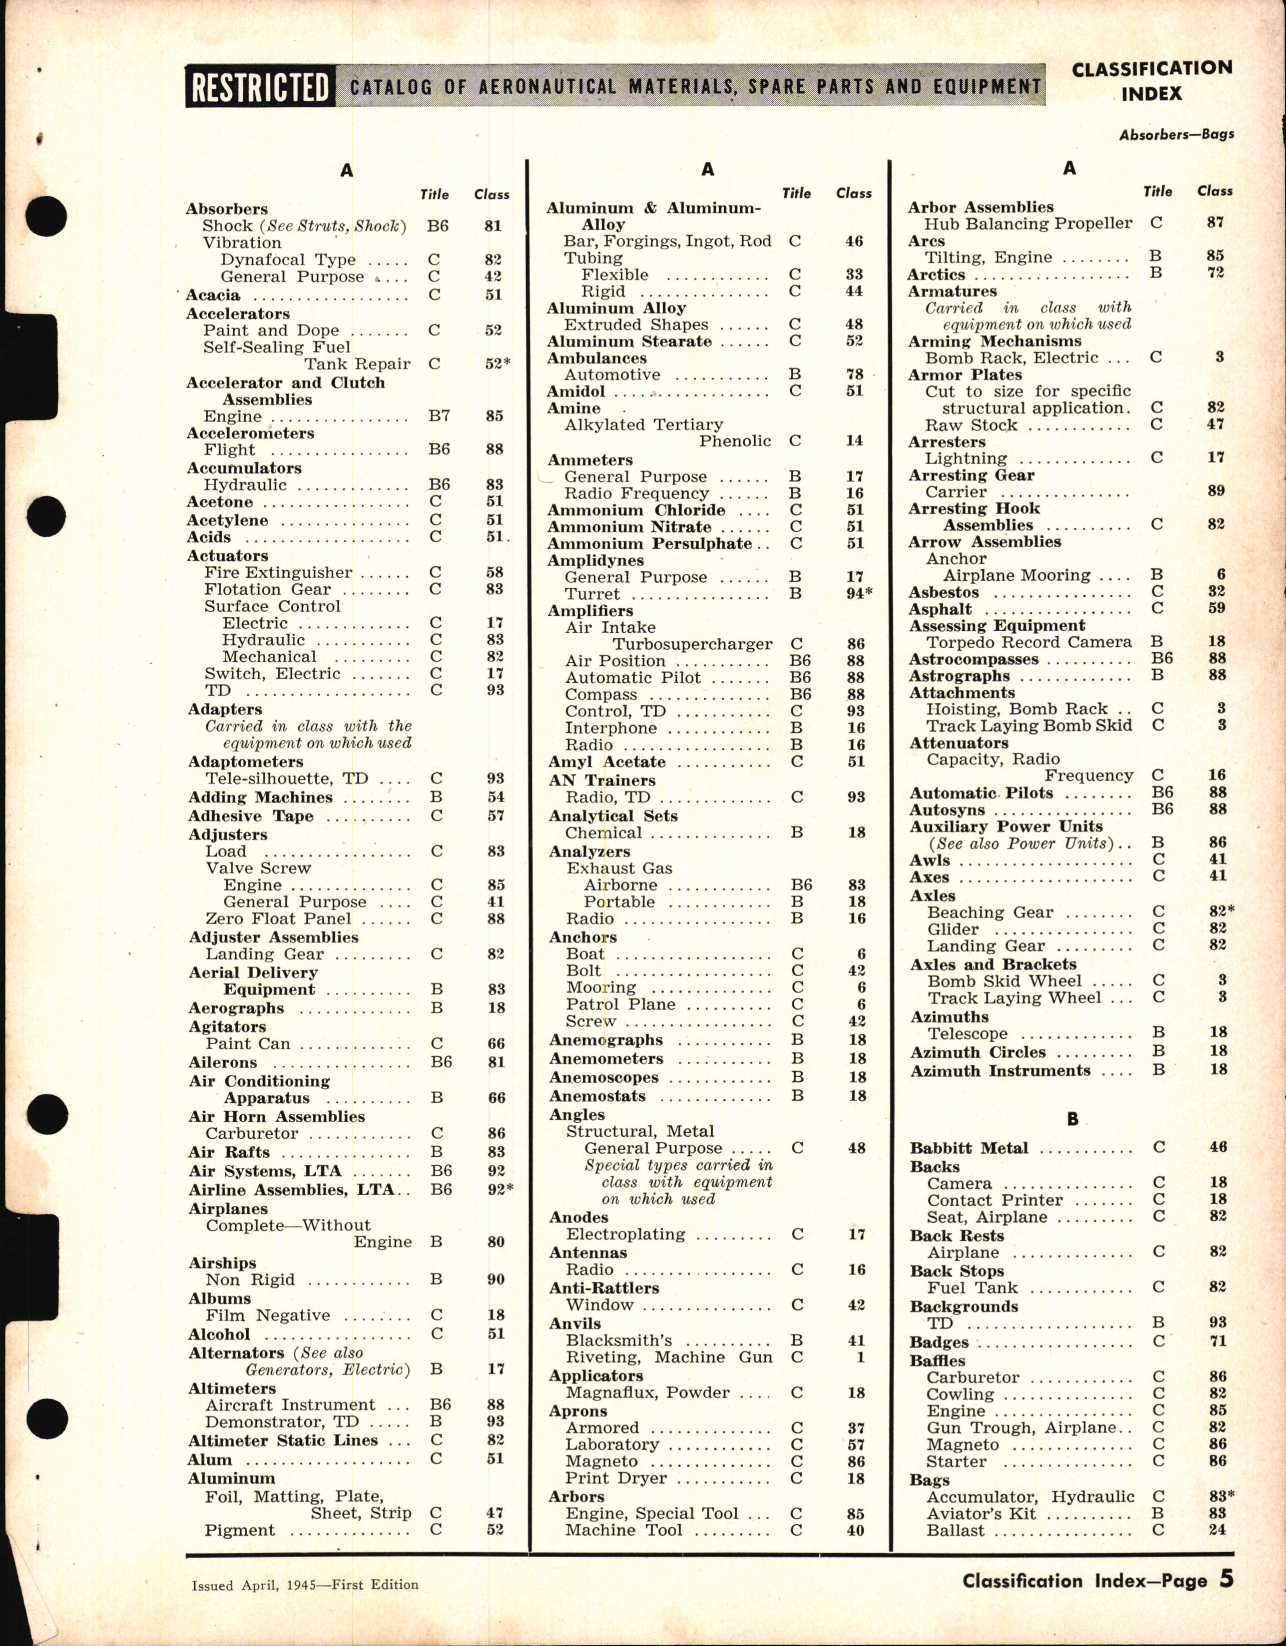 Sample page 5 from AirCorps Library document: Classification Index of Naval Aeronautical Materials